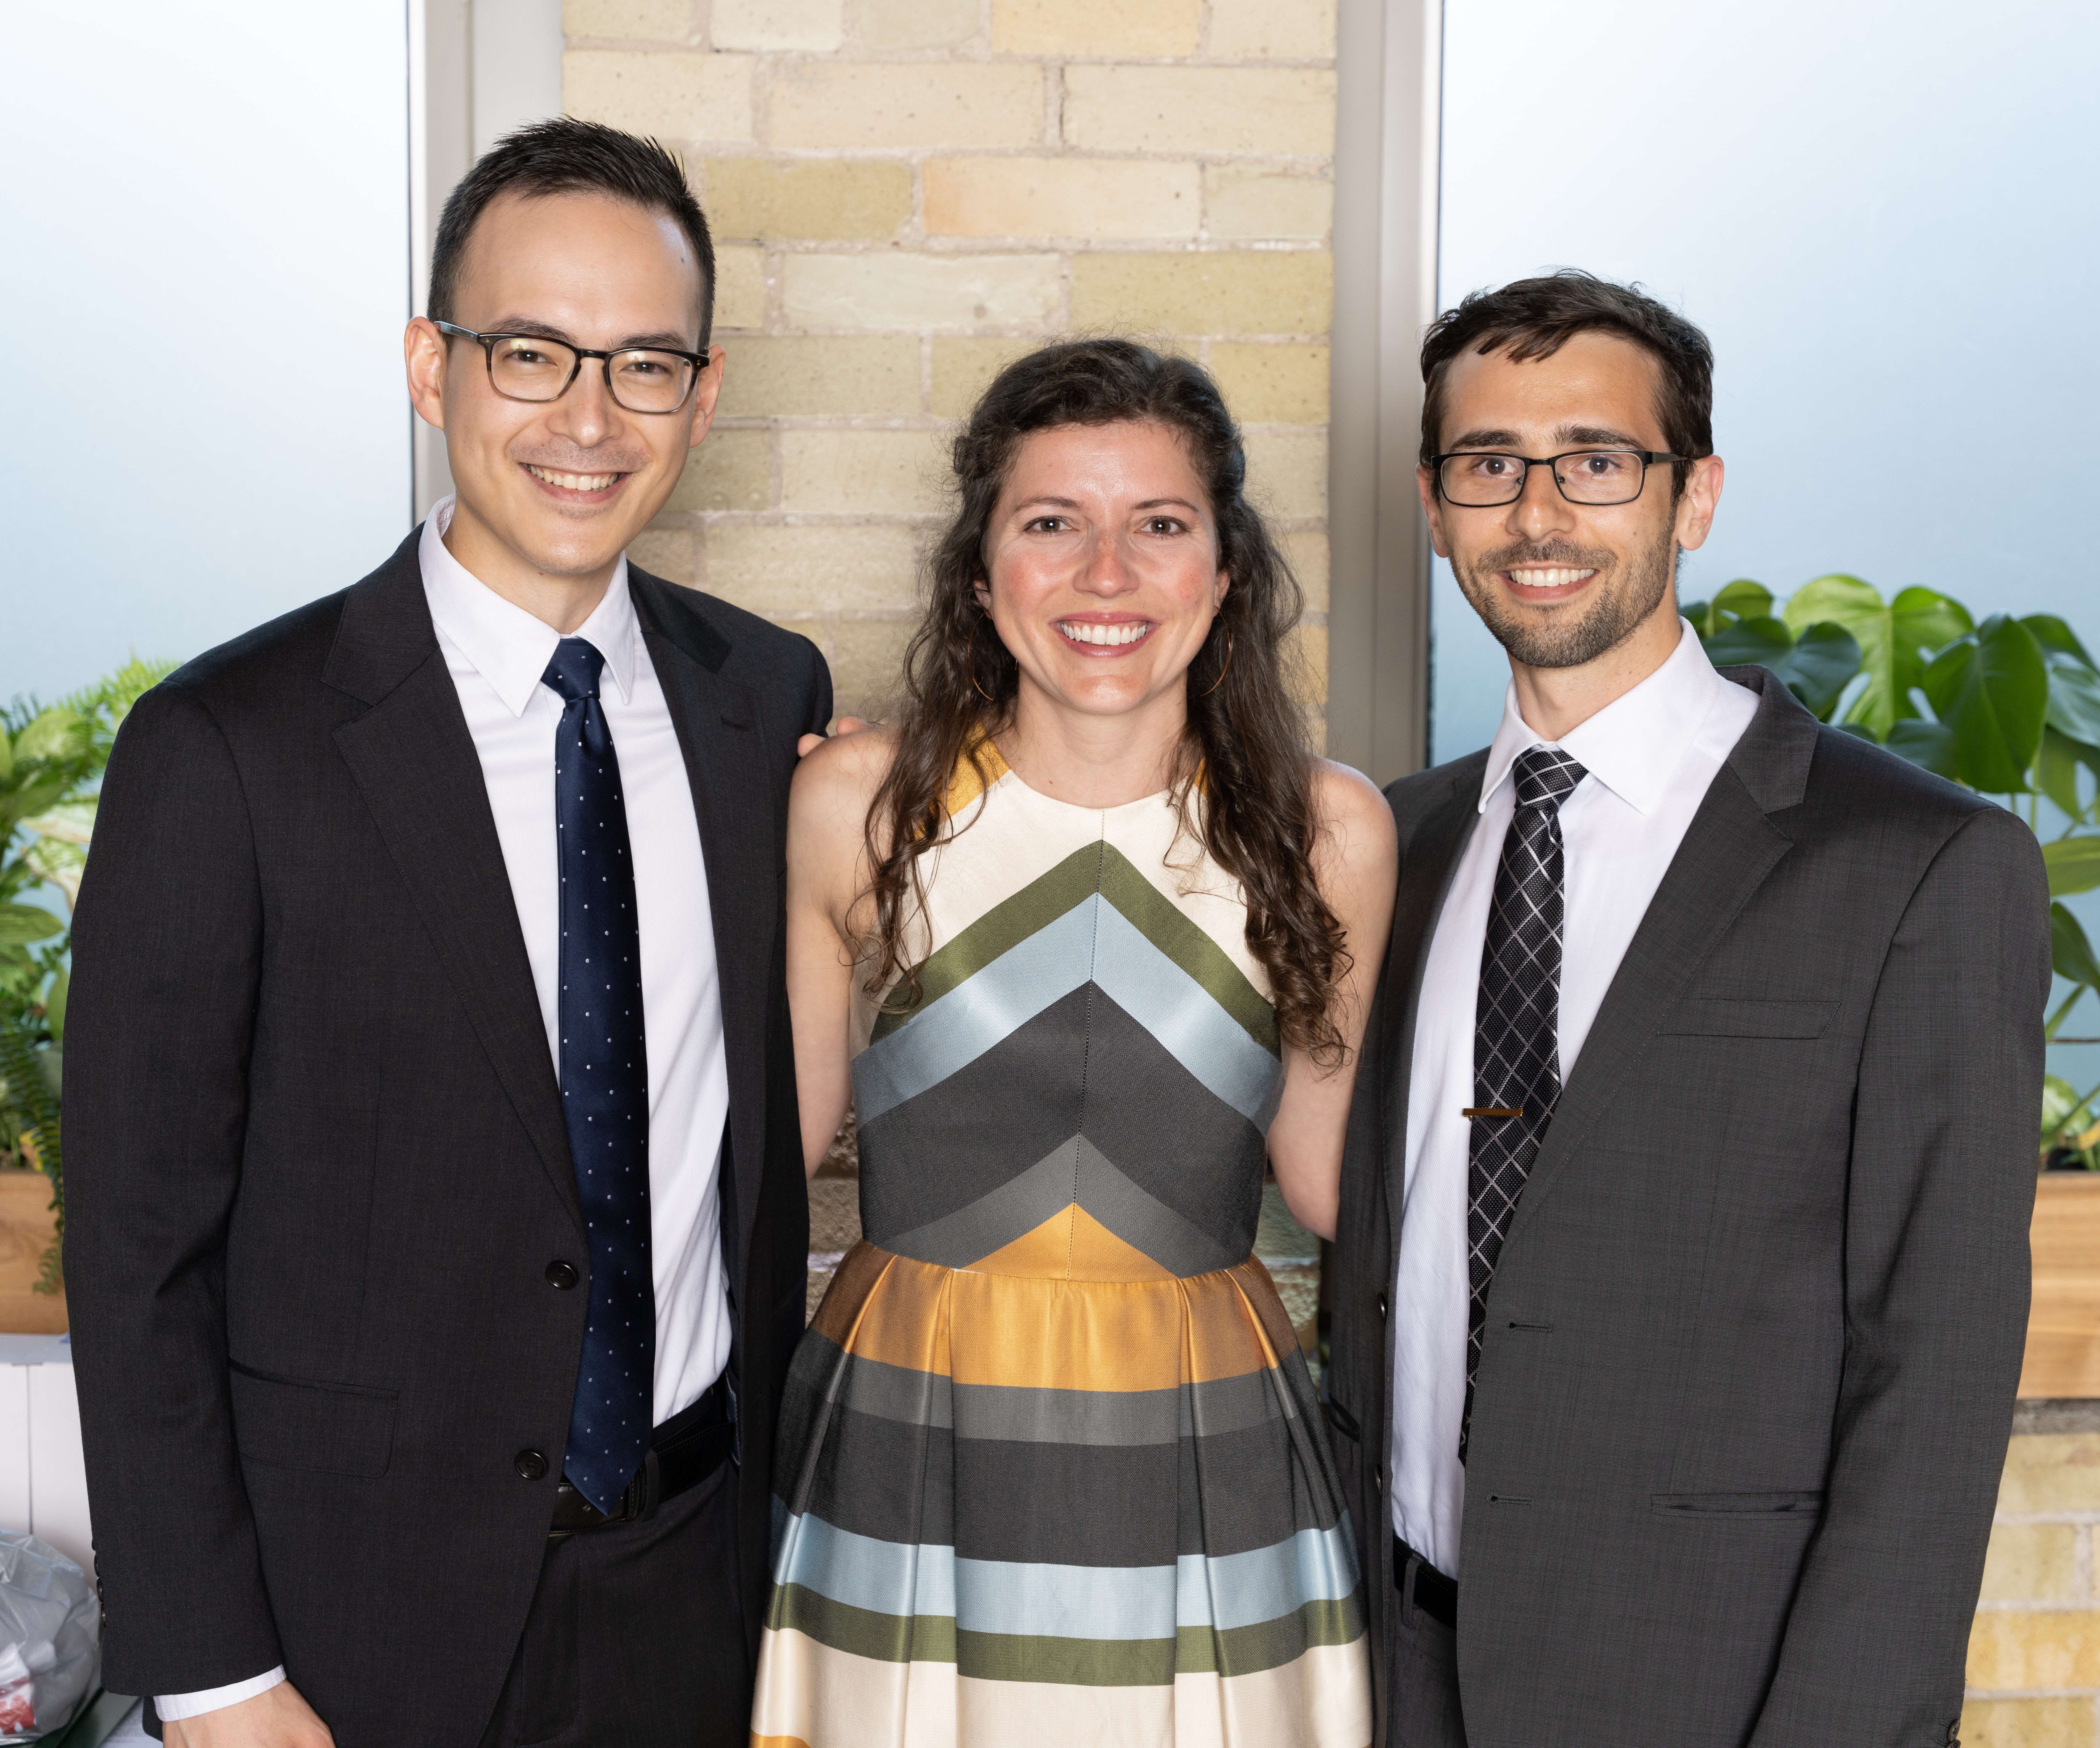 2022 Resident Graduates Dr. Shum, Dr. North and Dr. Puccia